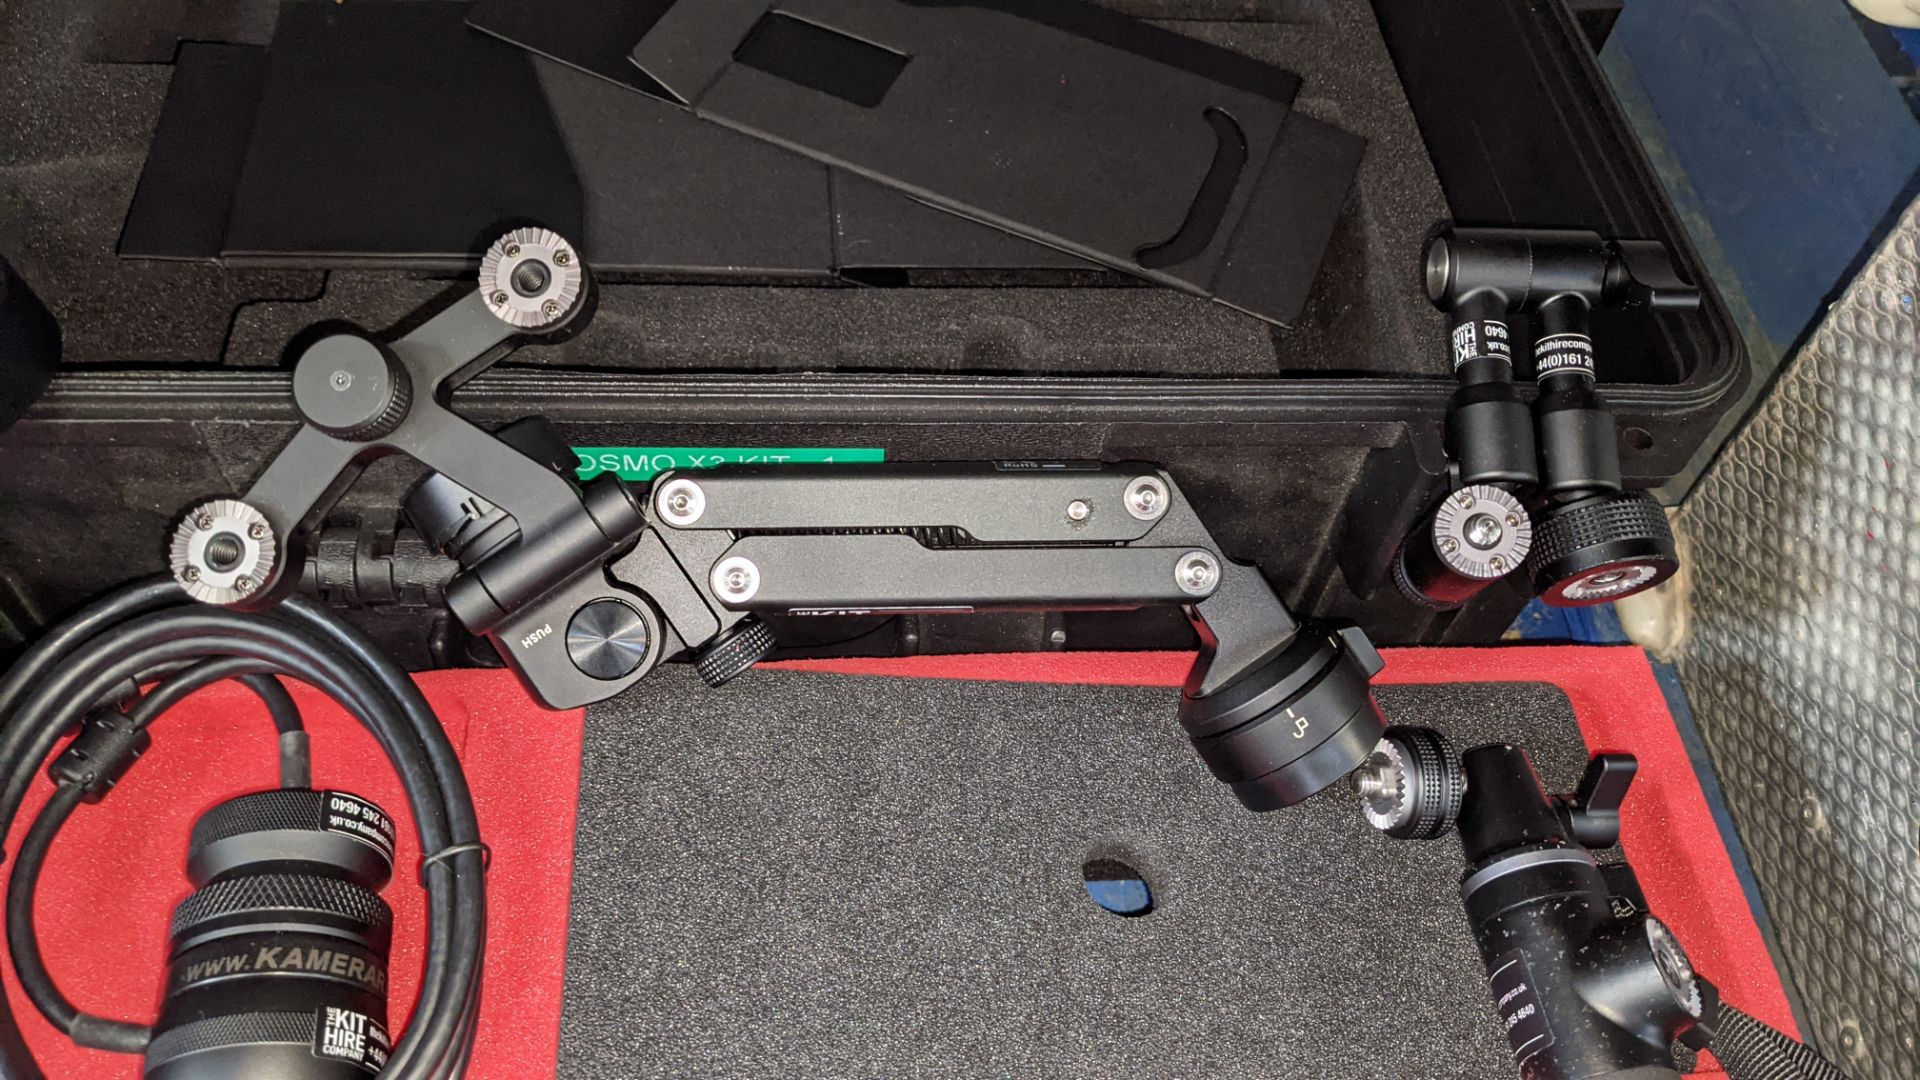 DJI Osmo X3 kit comprising hand-held gimbal plus wide variety of ancillaries for use with same, as d - Image 11 of 20